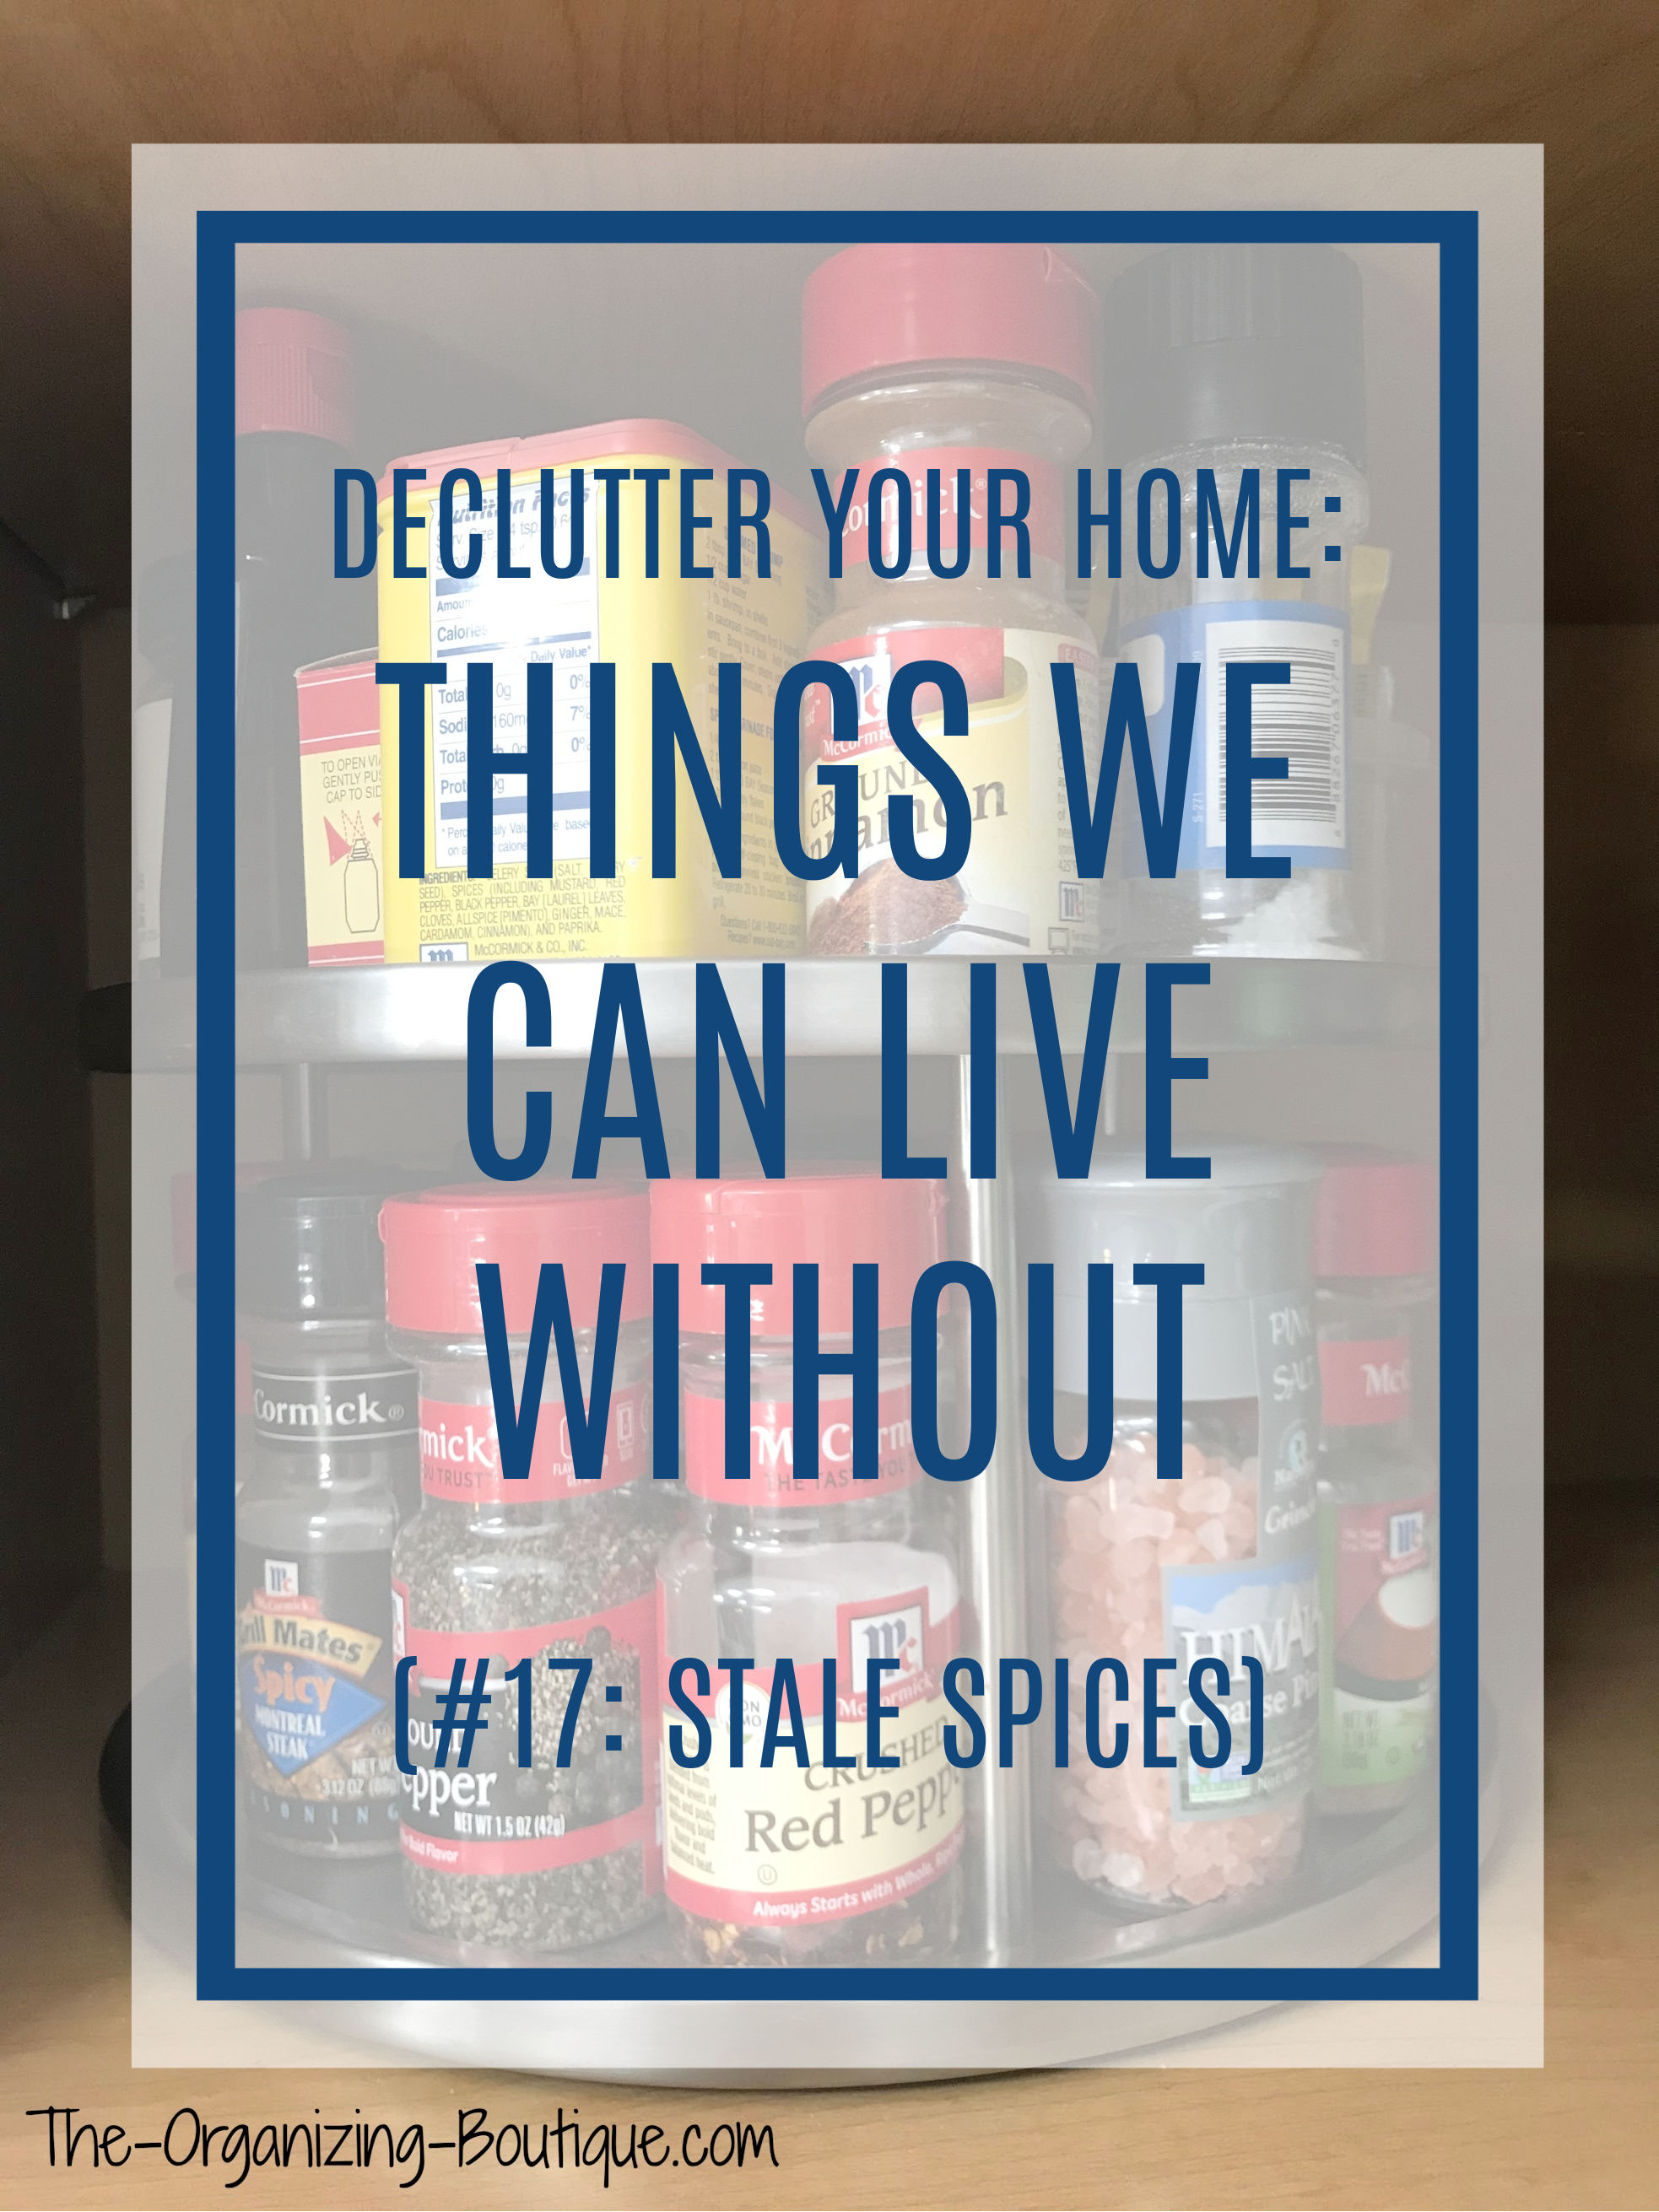 Declutter your home and declutter life! Here's a growing list of things you can live without. Let's do some clutter control!